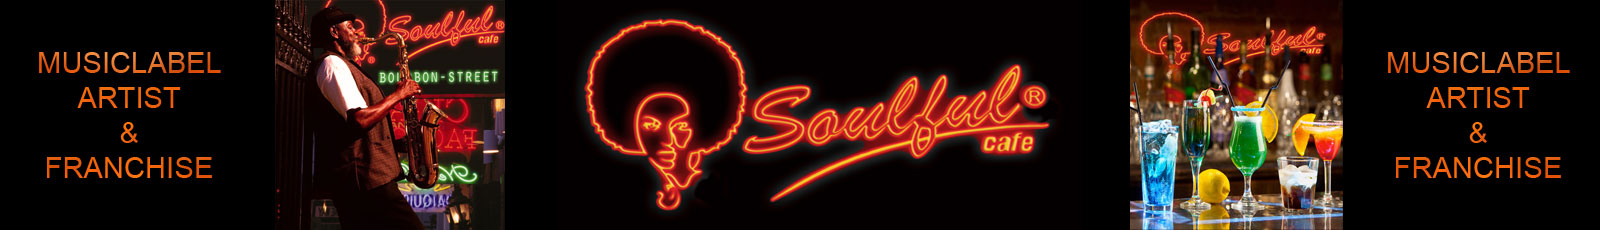 Soulful Cafe Musiclabel Franchise Deep House